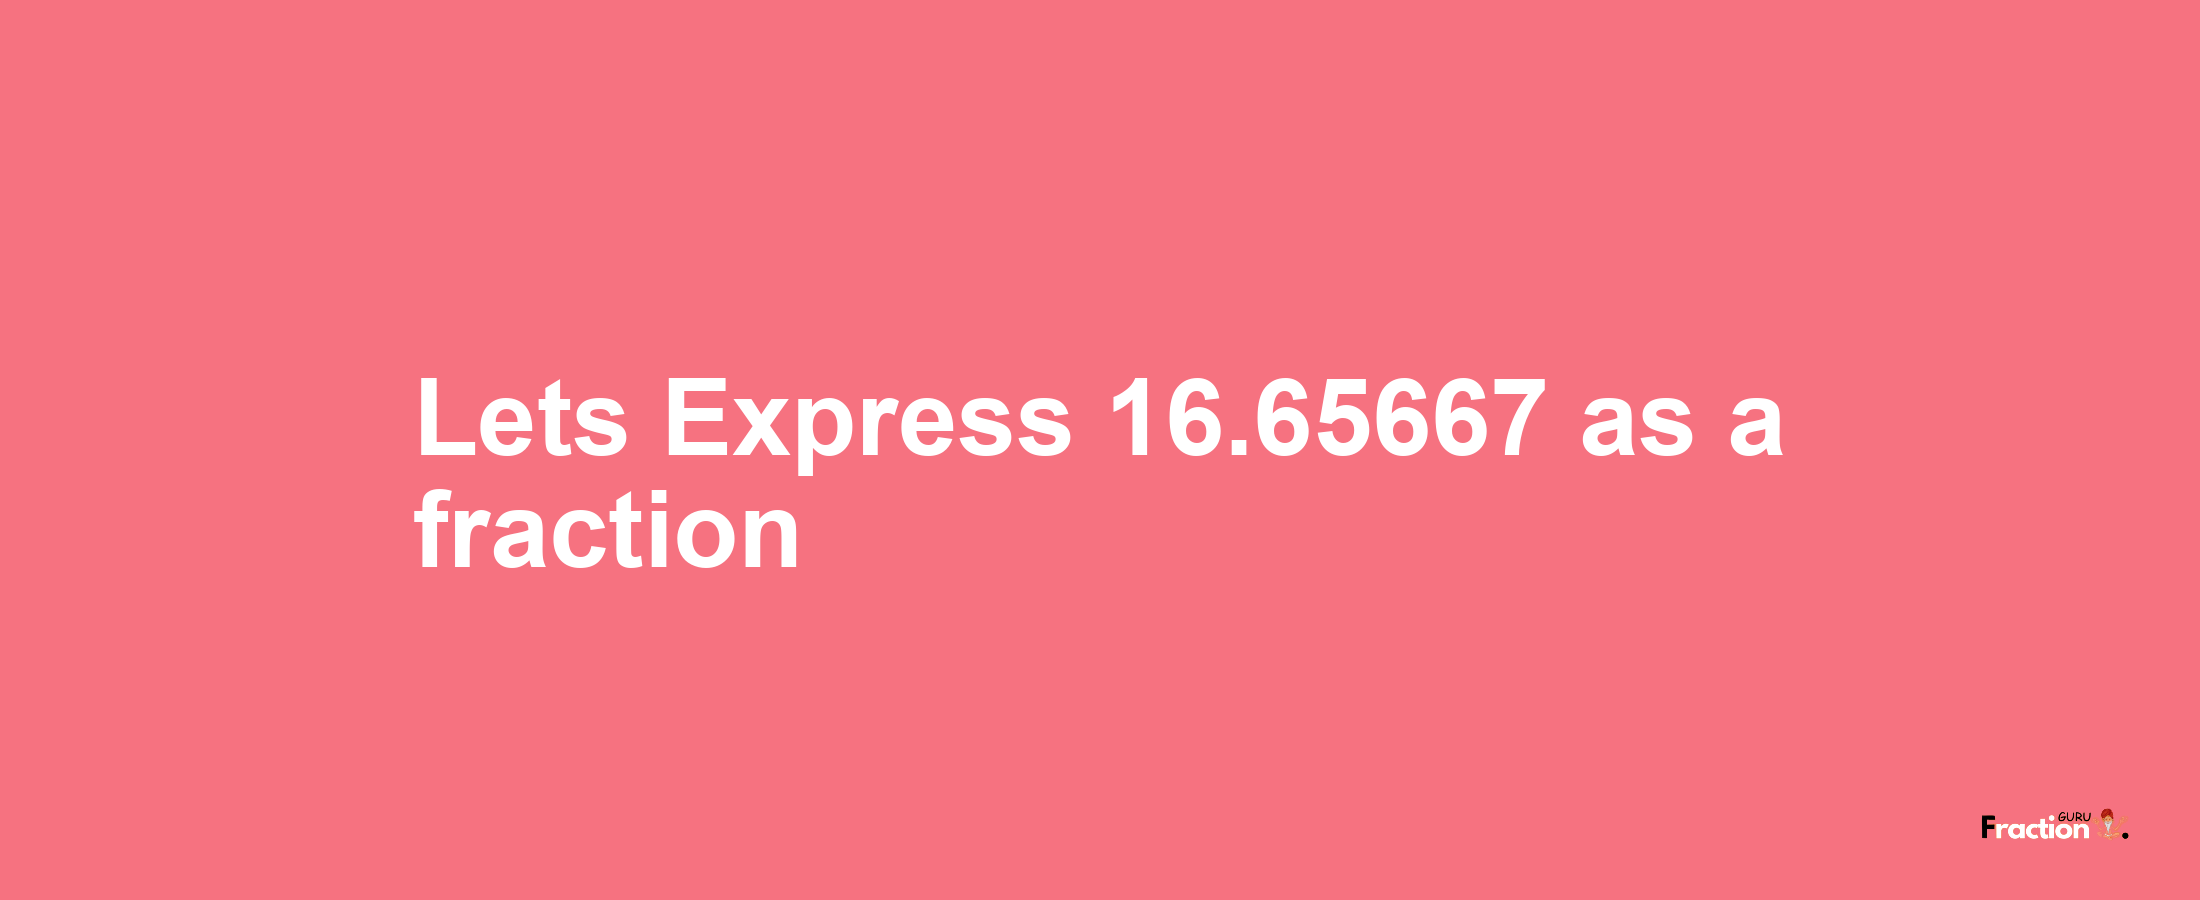 Lets Express 16.65667 as afraction